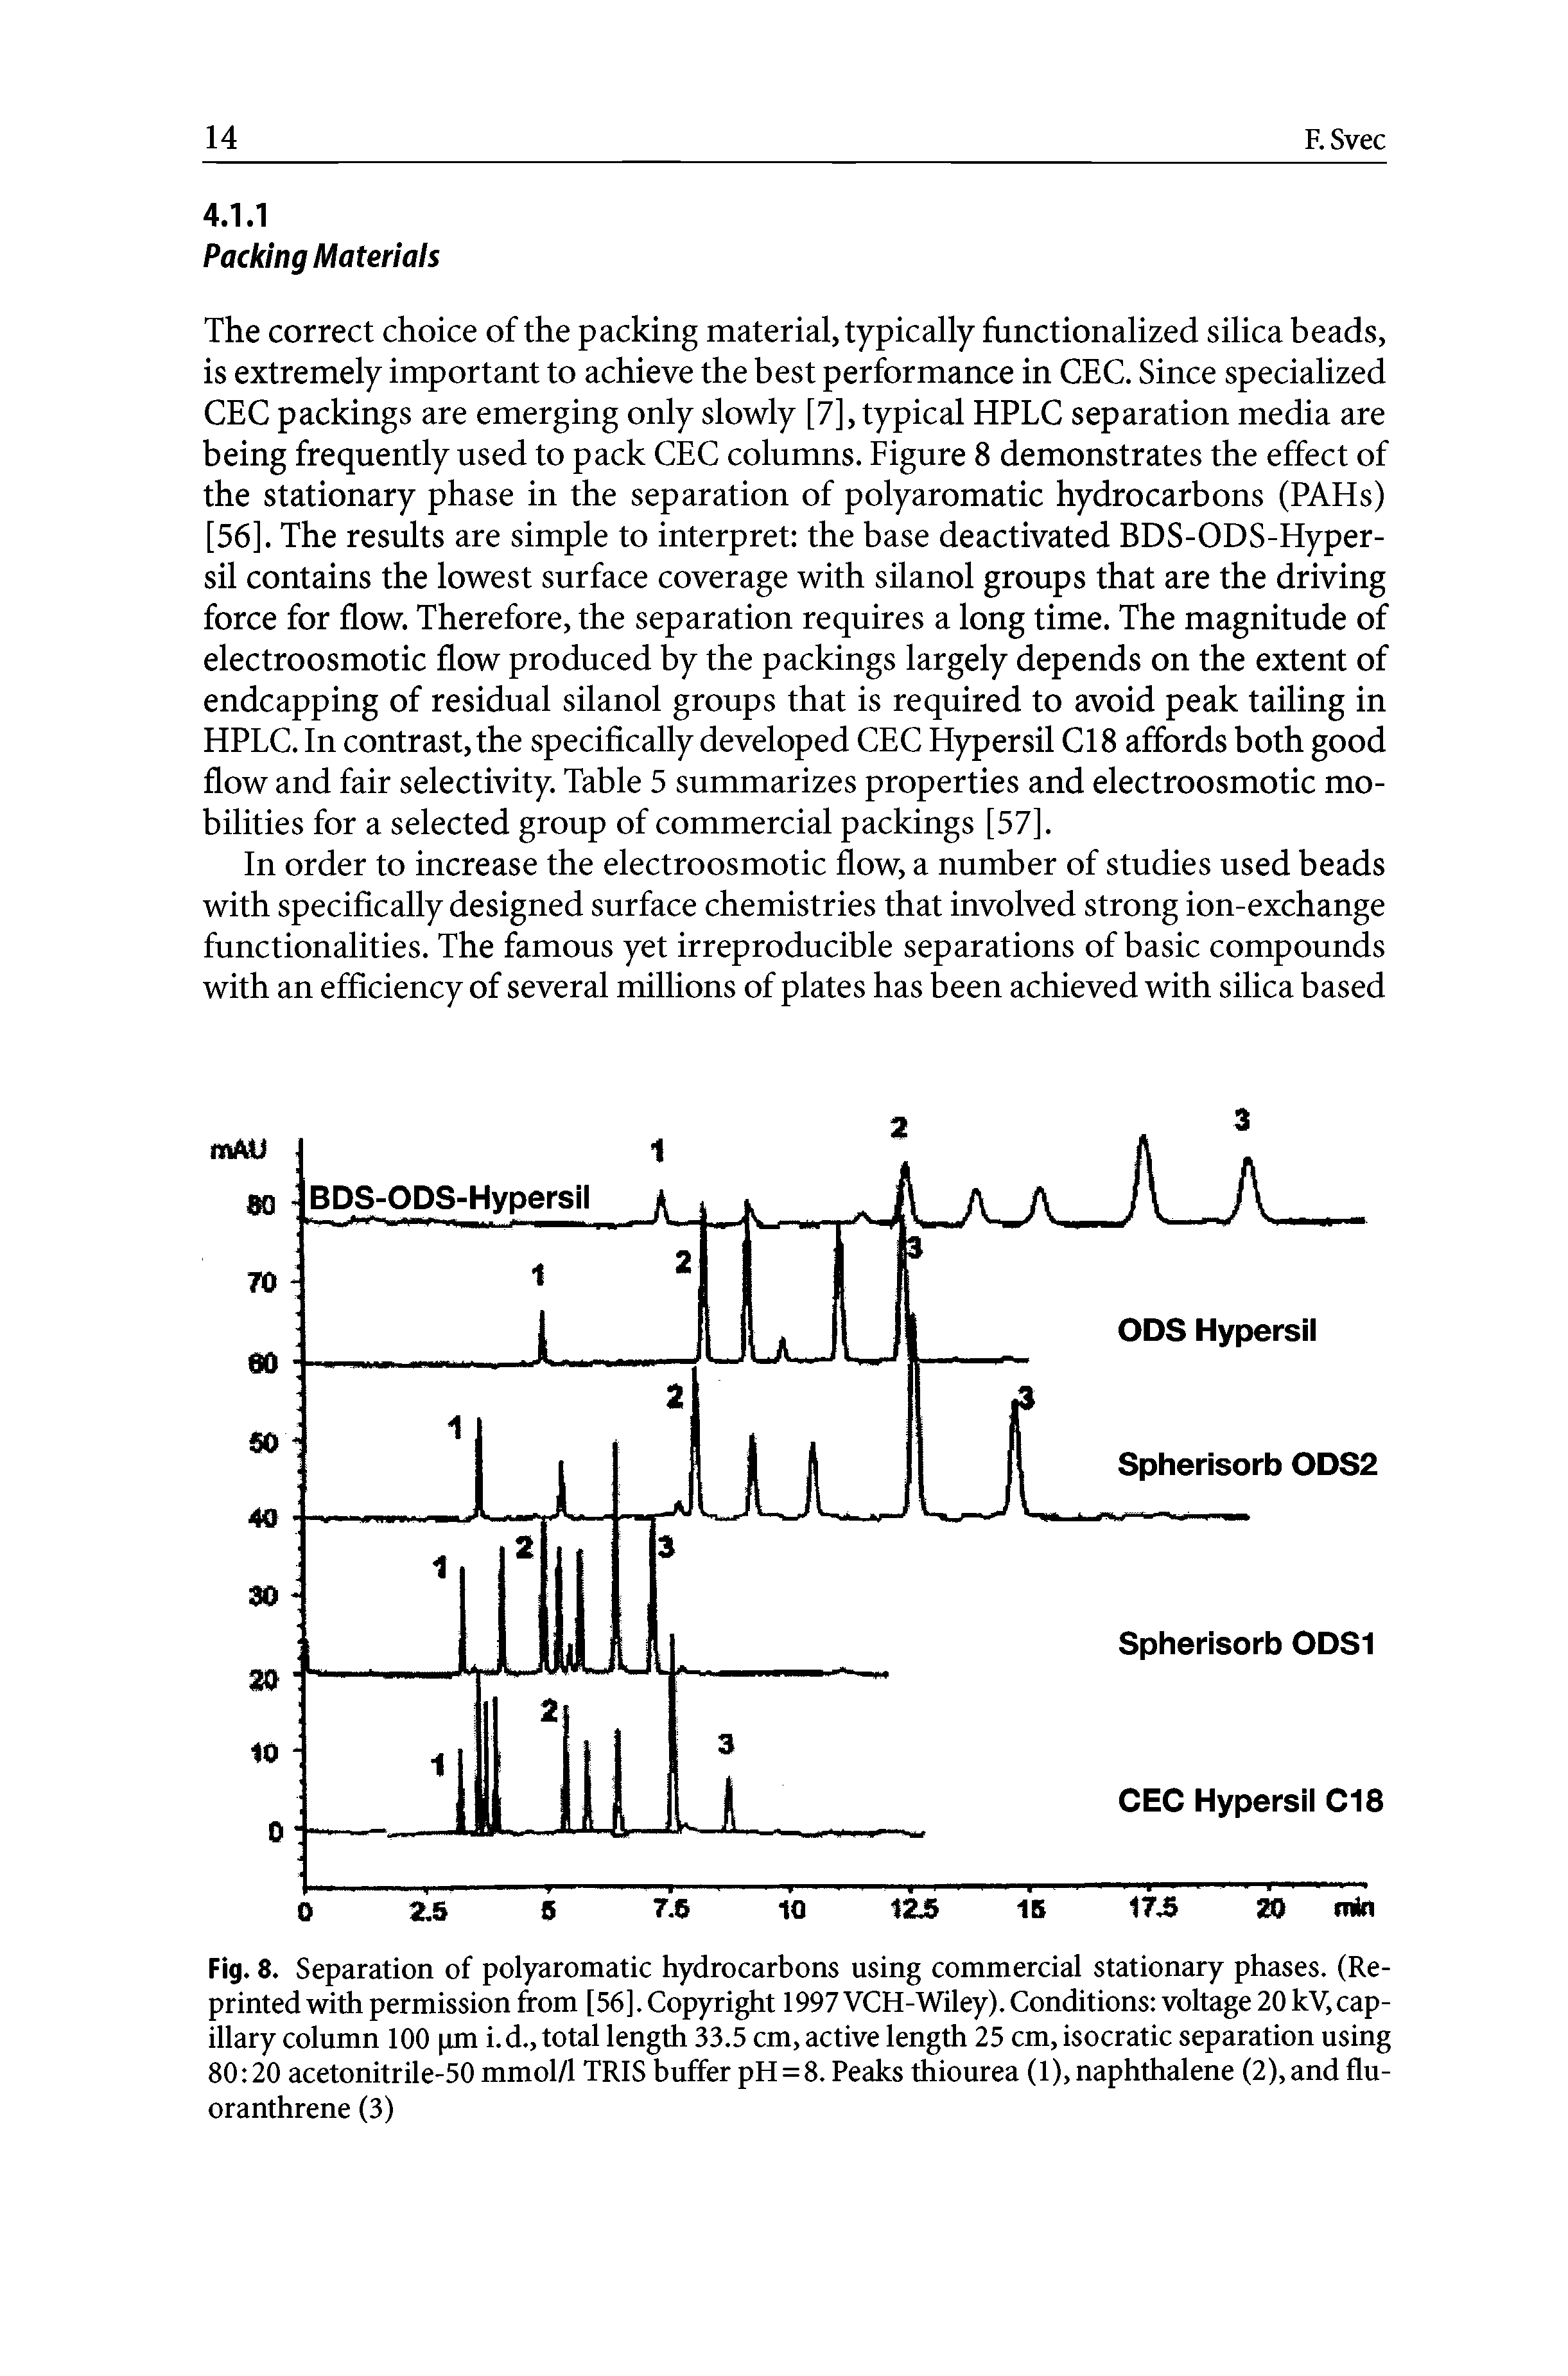 Fig. 8. Separation of polyaromatic hydrocarbons using commercial stationary phases. (Reprinted with permission from [56]. Copyright 1997 VCH-Wiley). Conditions voltage 20 kV,capillary column 100 pm i. d., total length 33.5 cm, active length 25 cm, isocratic separation using 80 20 acetonitrile-50 mmol/1 TRIS buffer pH=8. Peaks thiourea (1), naphthalene (2), and flu-oranthrene (3)...